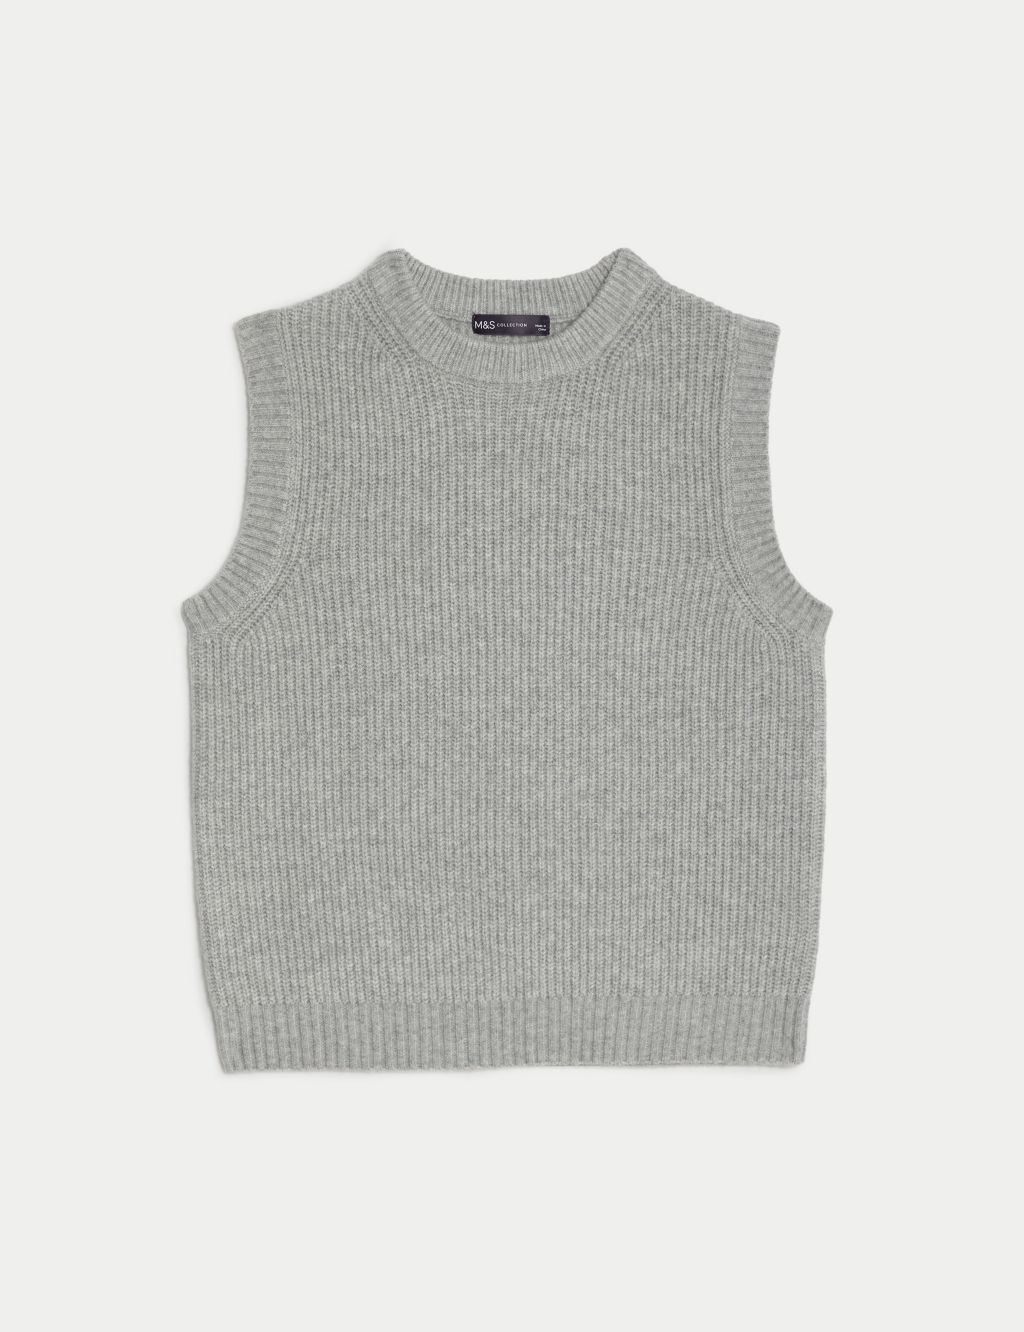 Air-Yarn Ribbed Crew Neck Knitted Vest image 2